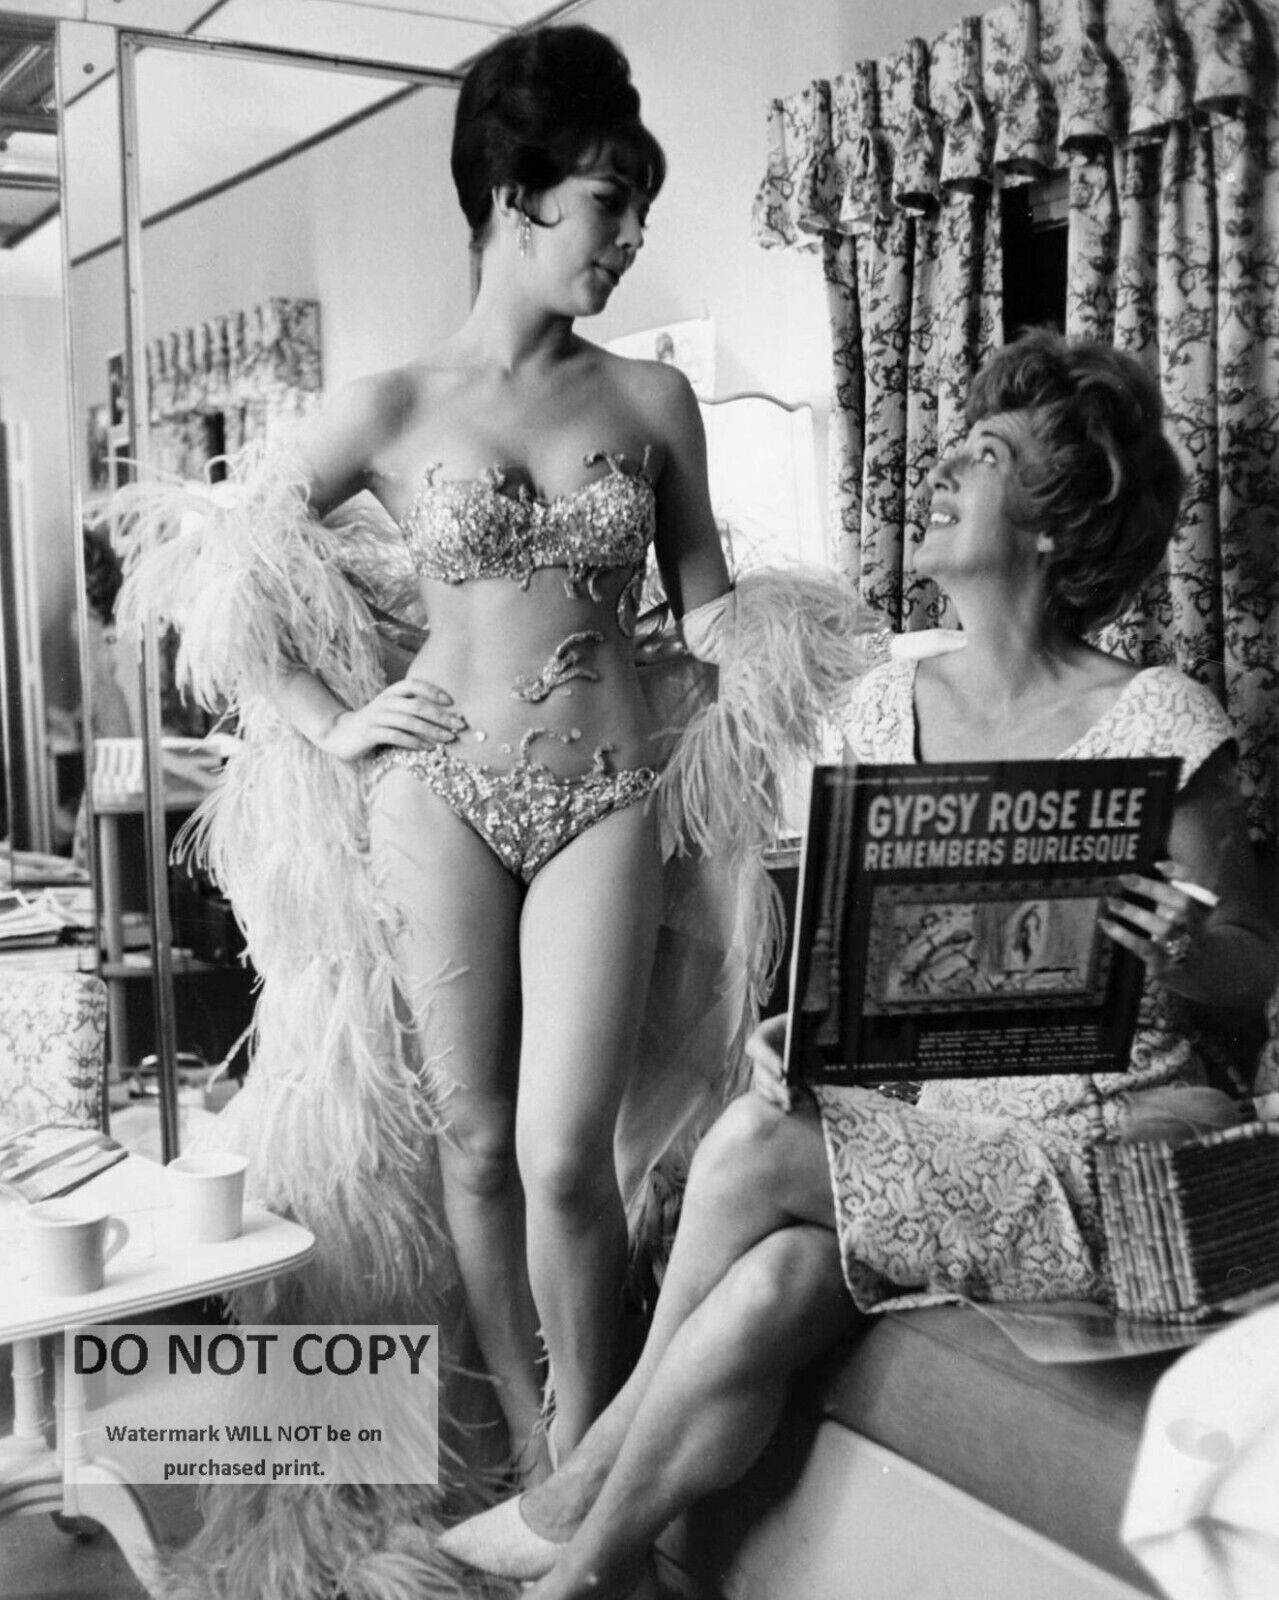 NATALIE WOOD & GYPSY ROSE LEE DURING THE FILMING OF \